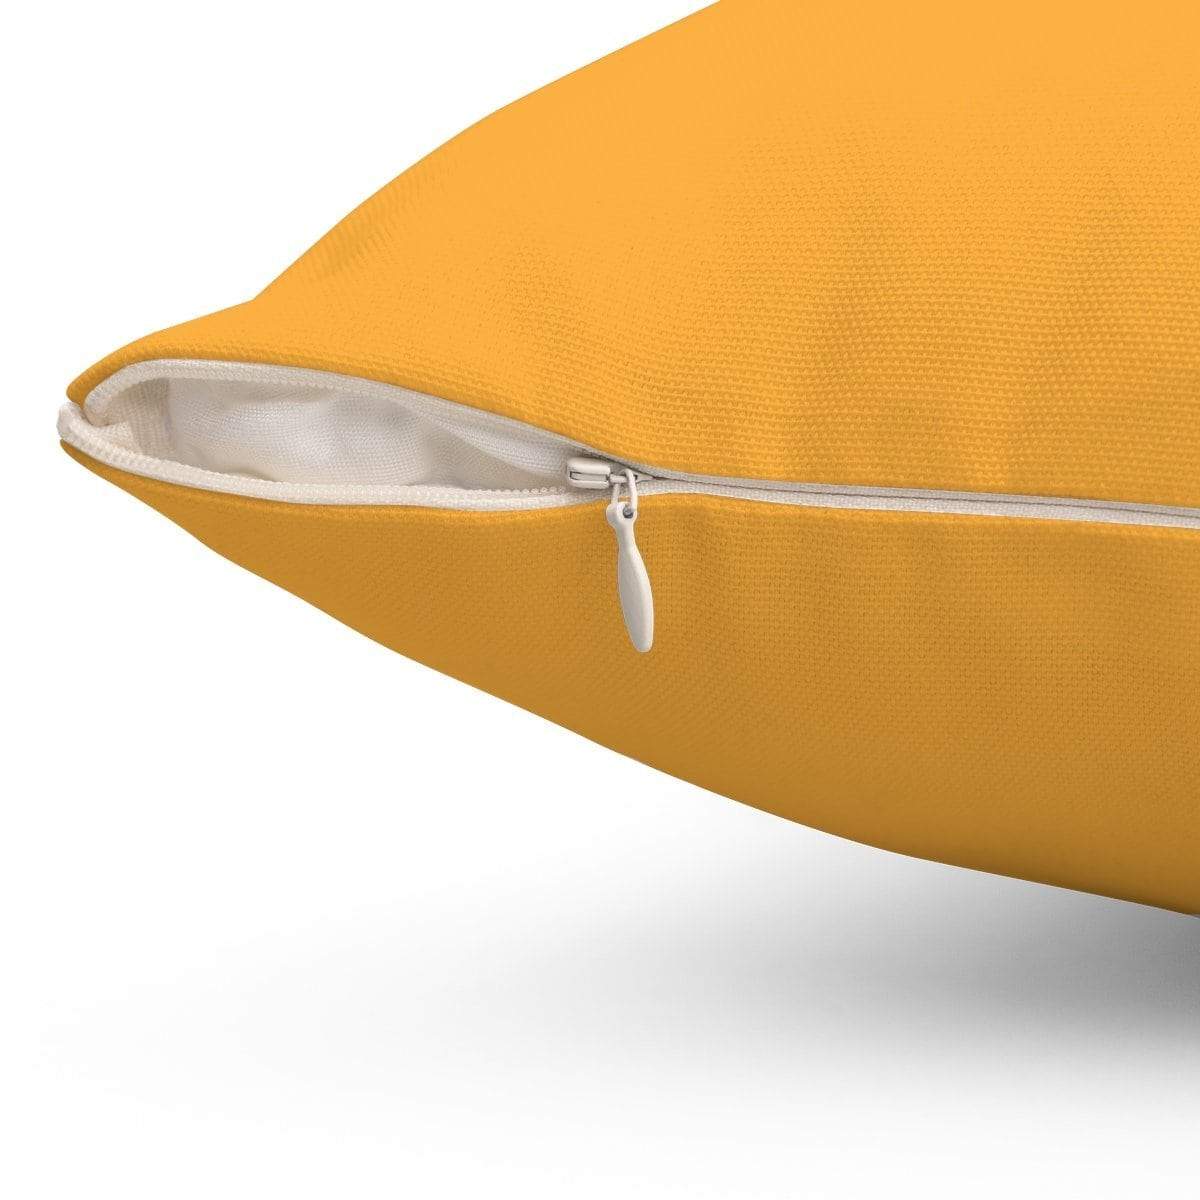 This cat cushion features a zipper so you can easily throw it in the laundry and get it fresh and clean